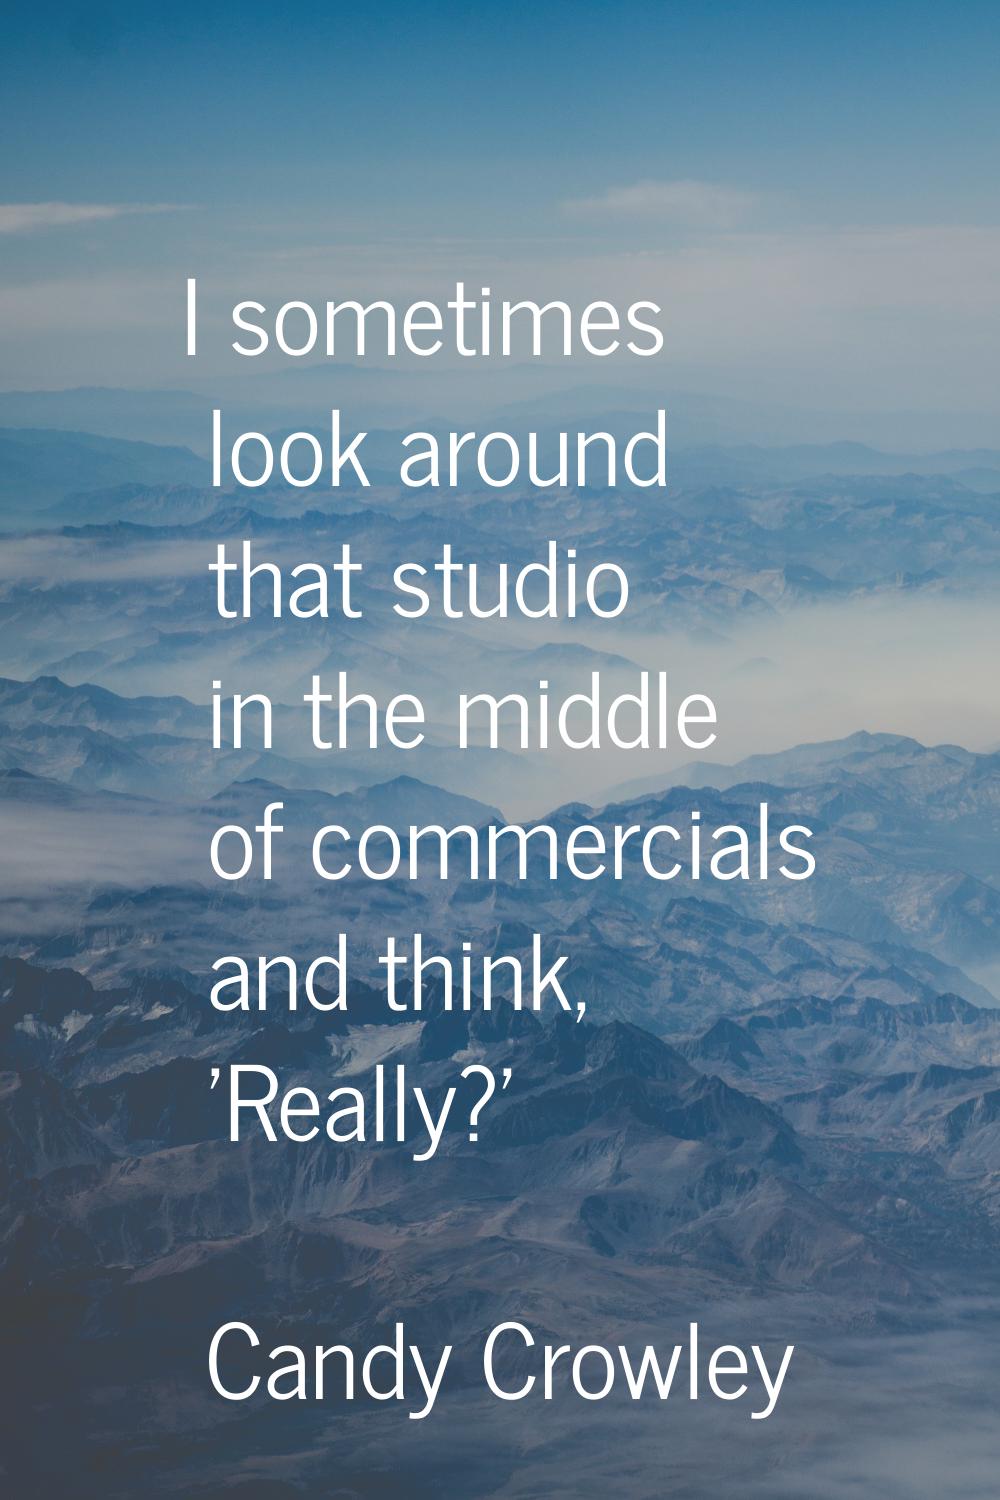 I sometimes look around that studio in the middle of commercials and think, 'Really?'